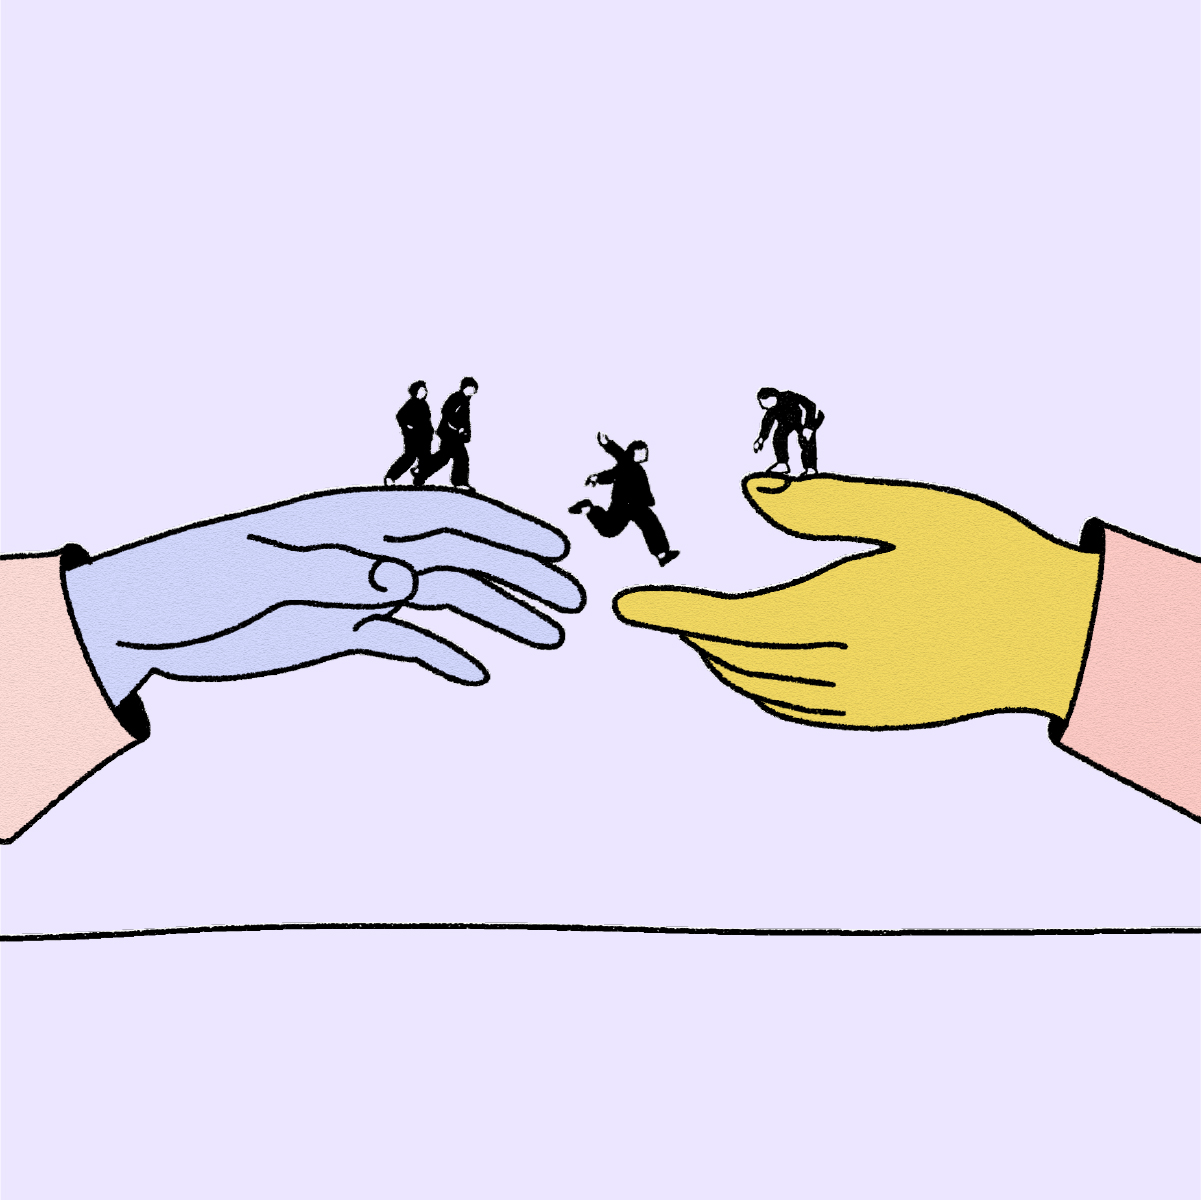 Illustration of people jumping across two large hands